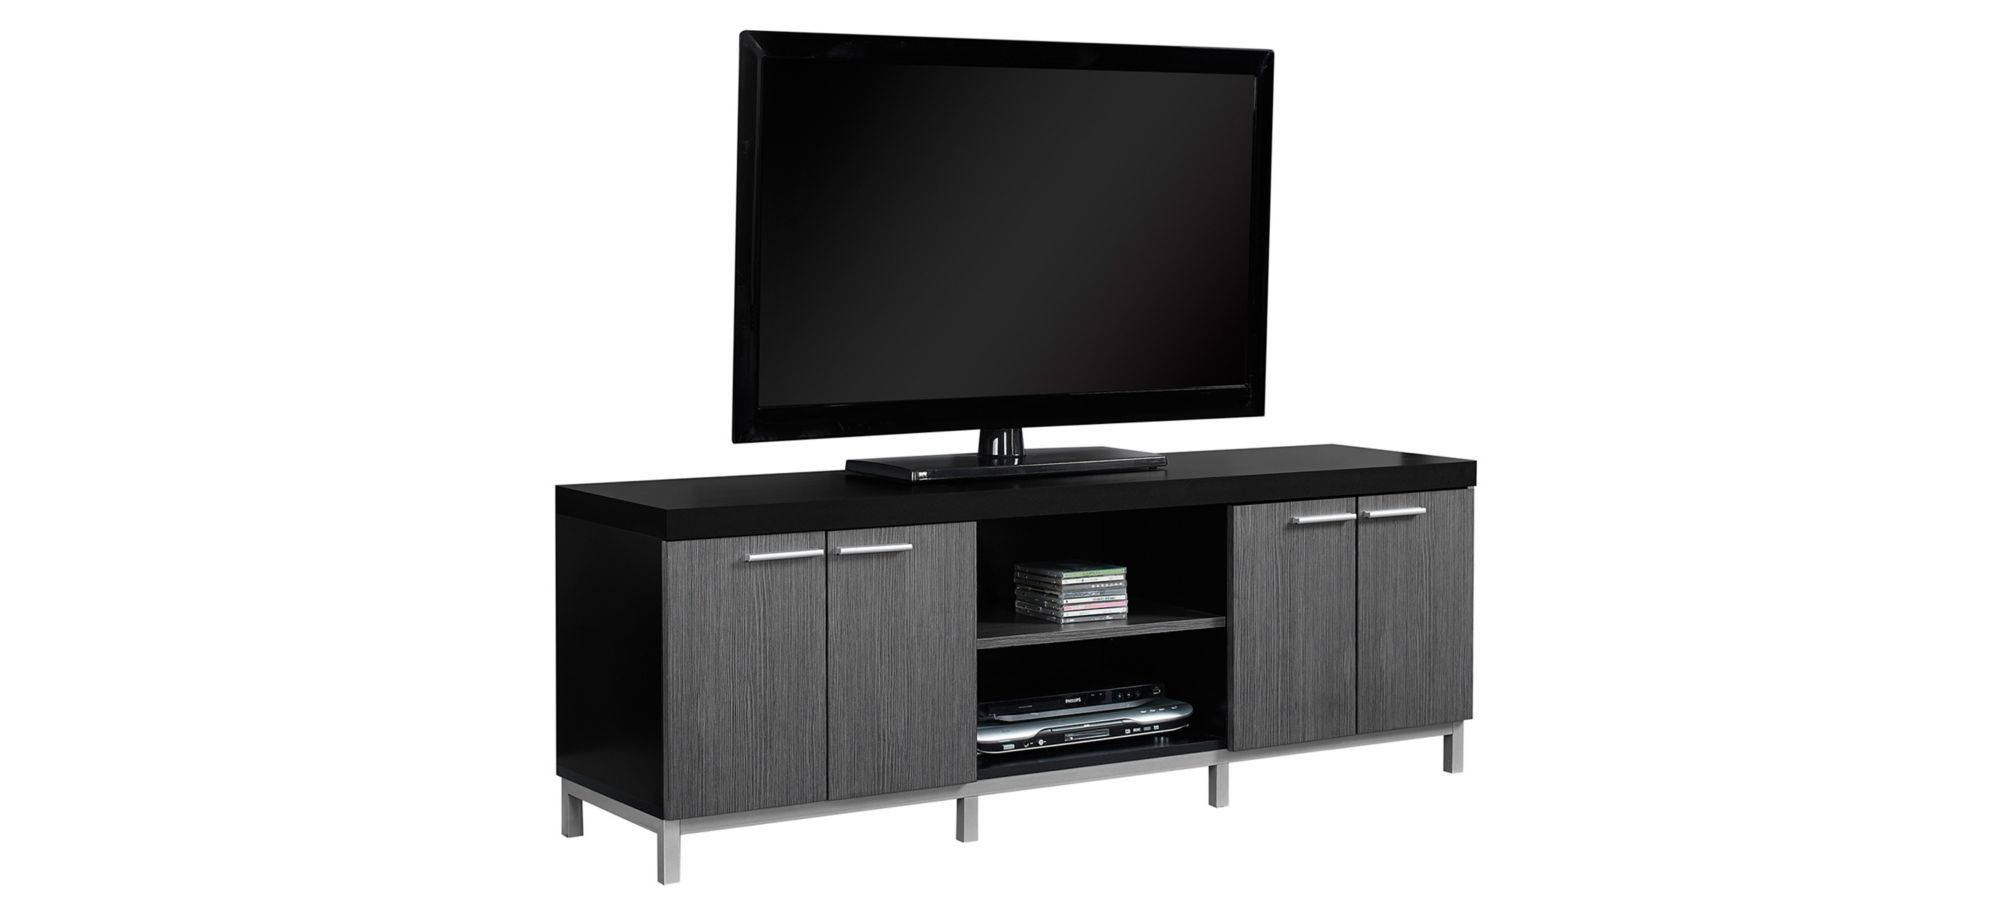 60" Monarch TV Stand in Black by Monarch Specialties